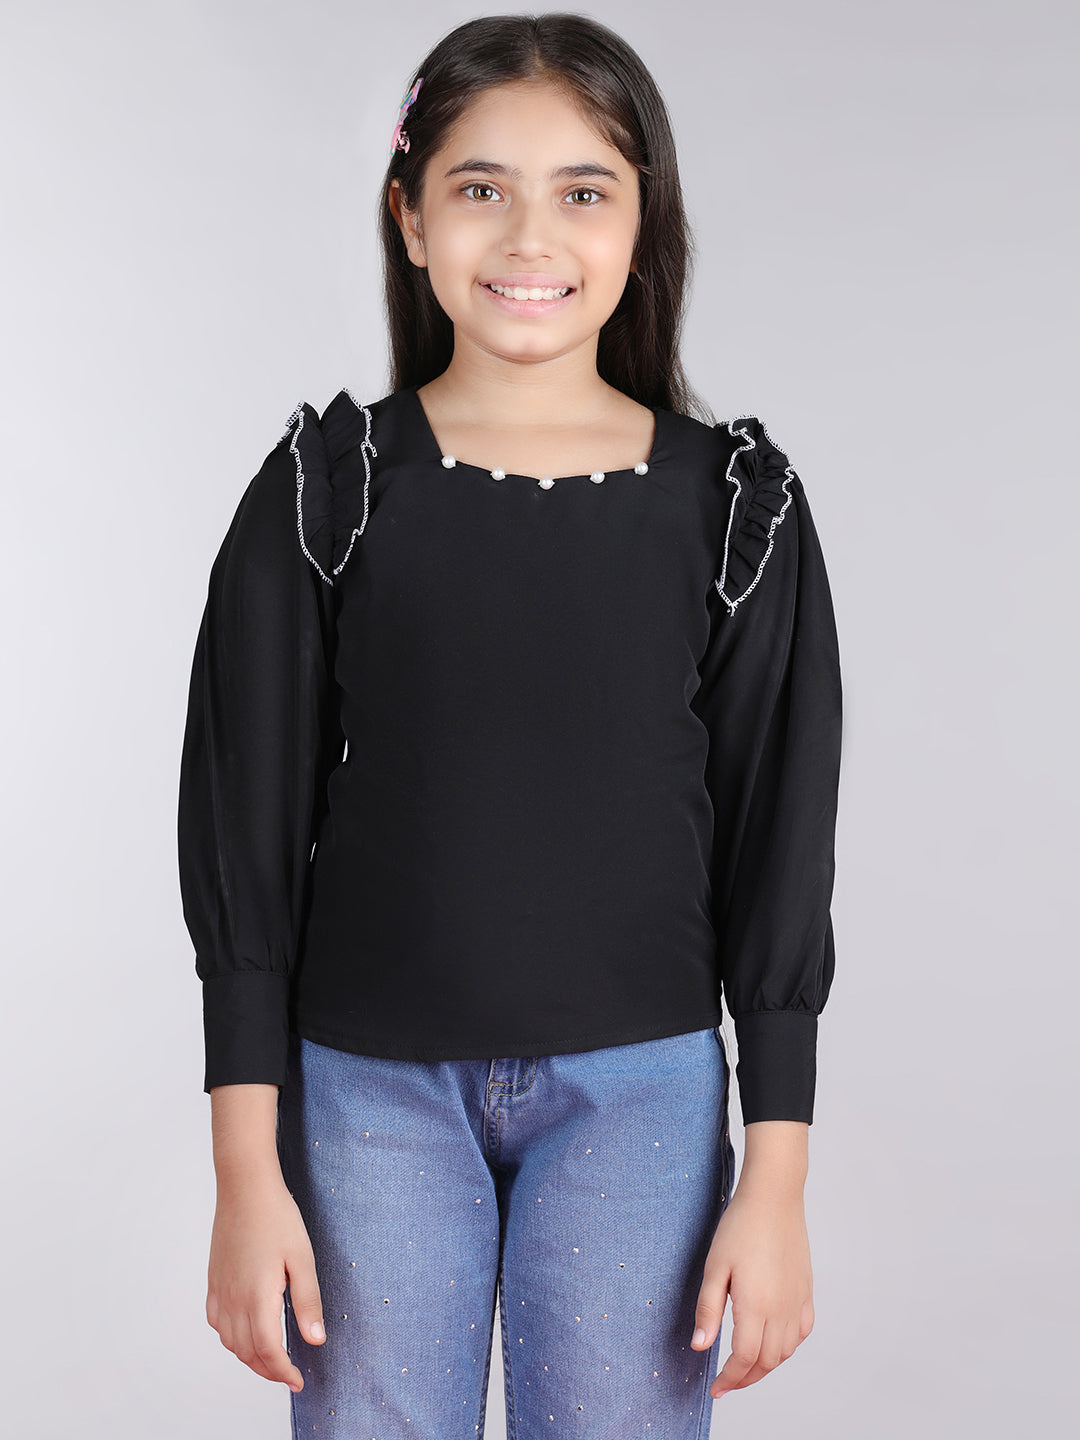 Cutiekins Solid Full Sleeves Polyester Tops-Black & White